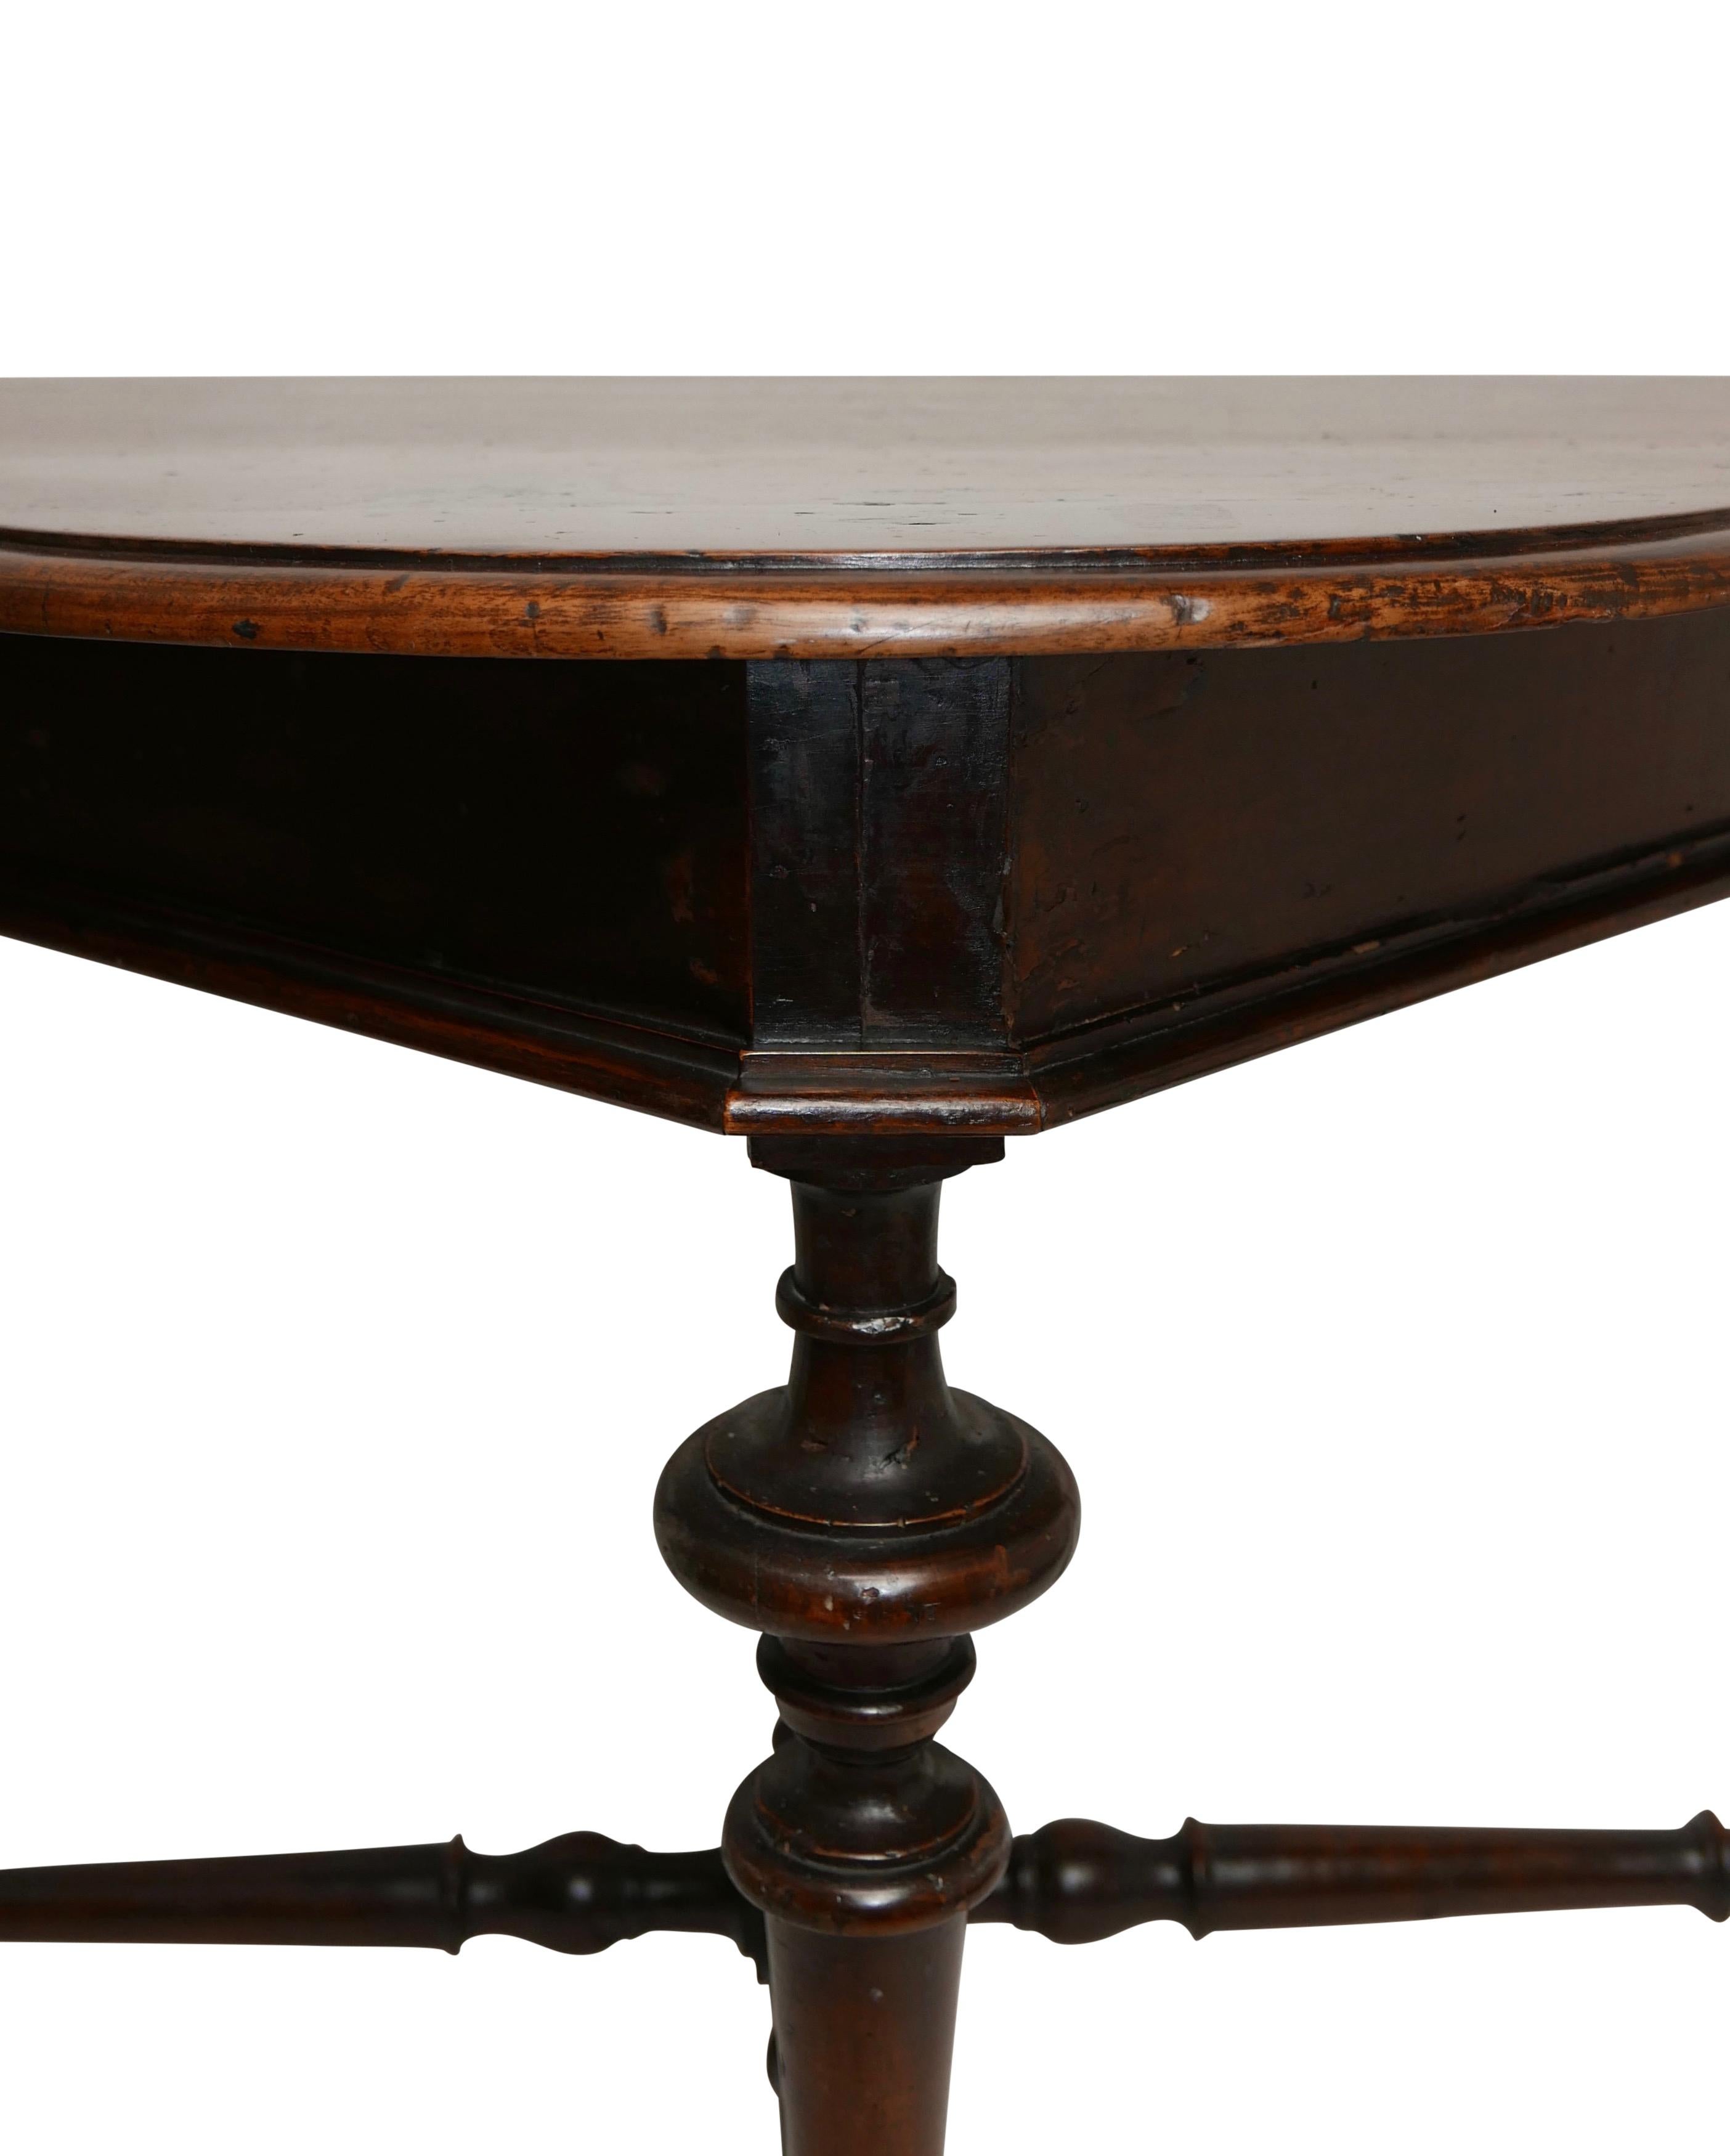 Northern Italian Walnut Console Table, Early 19th Century For Sale 2